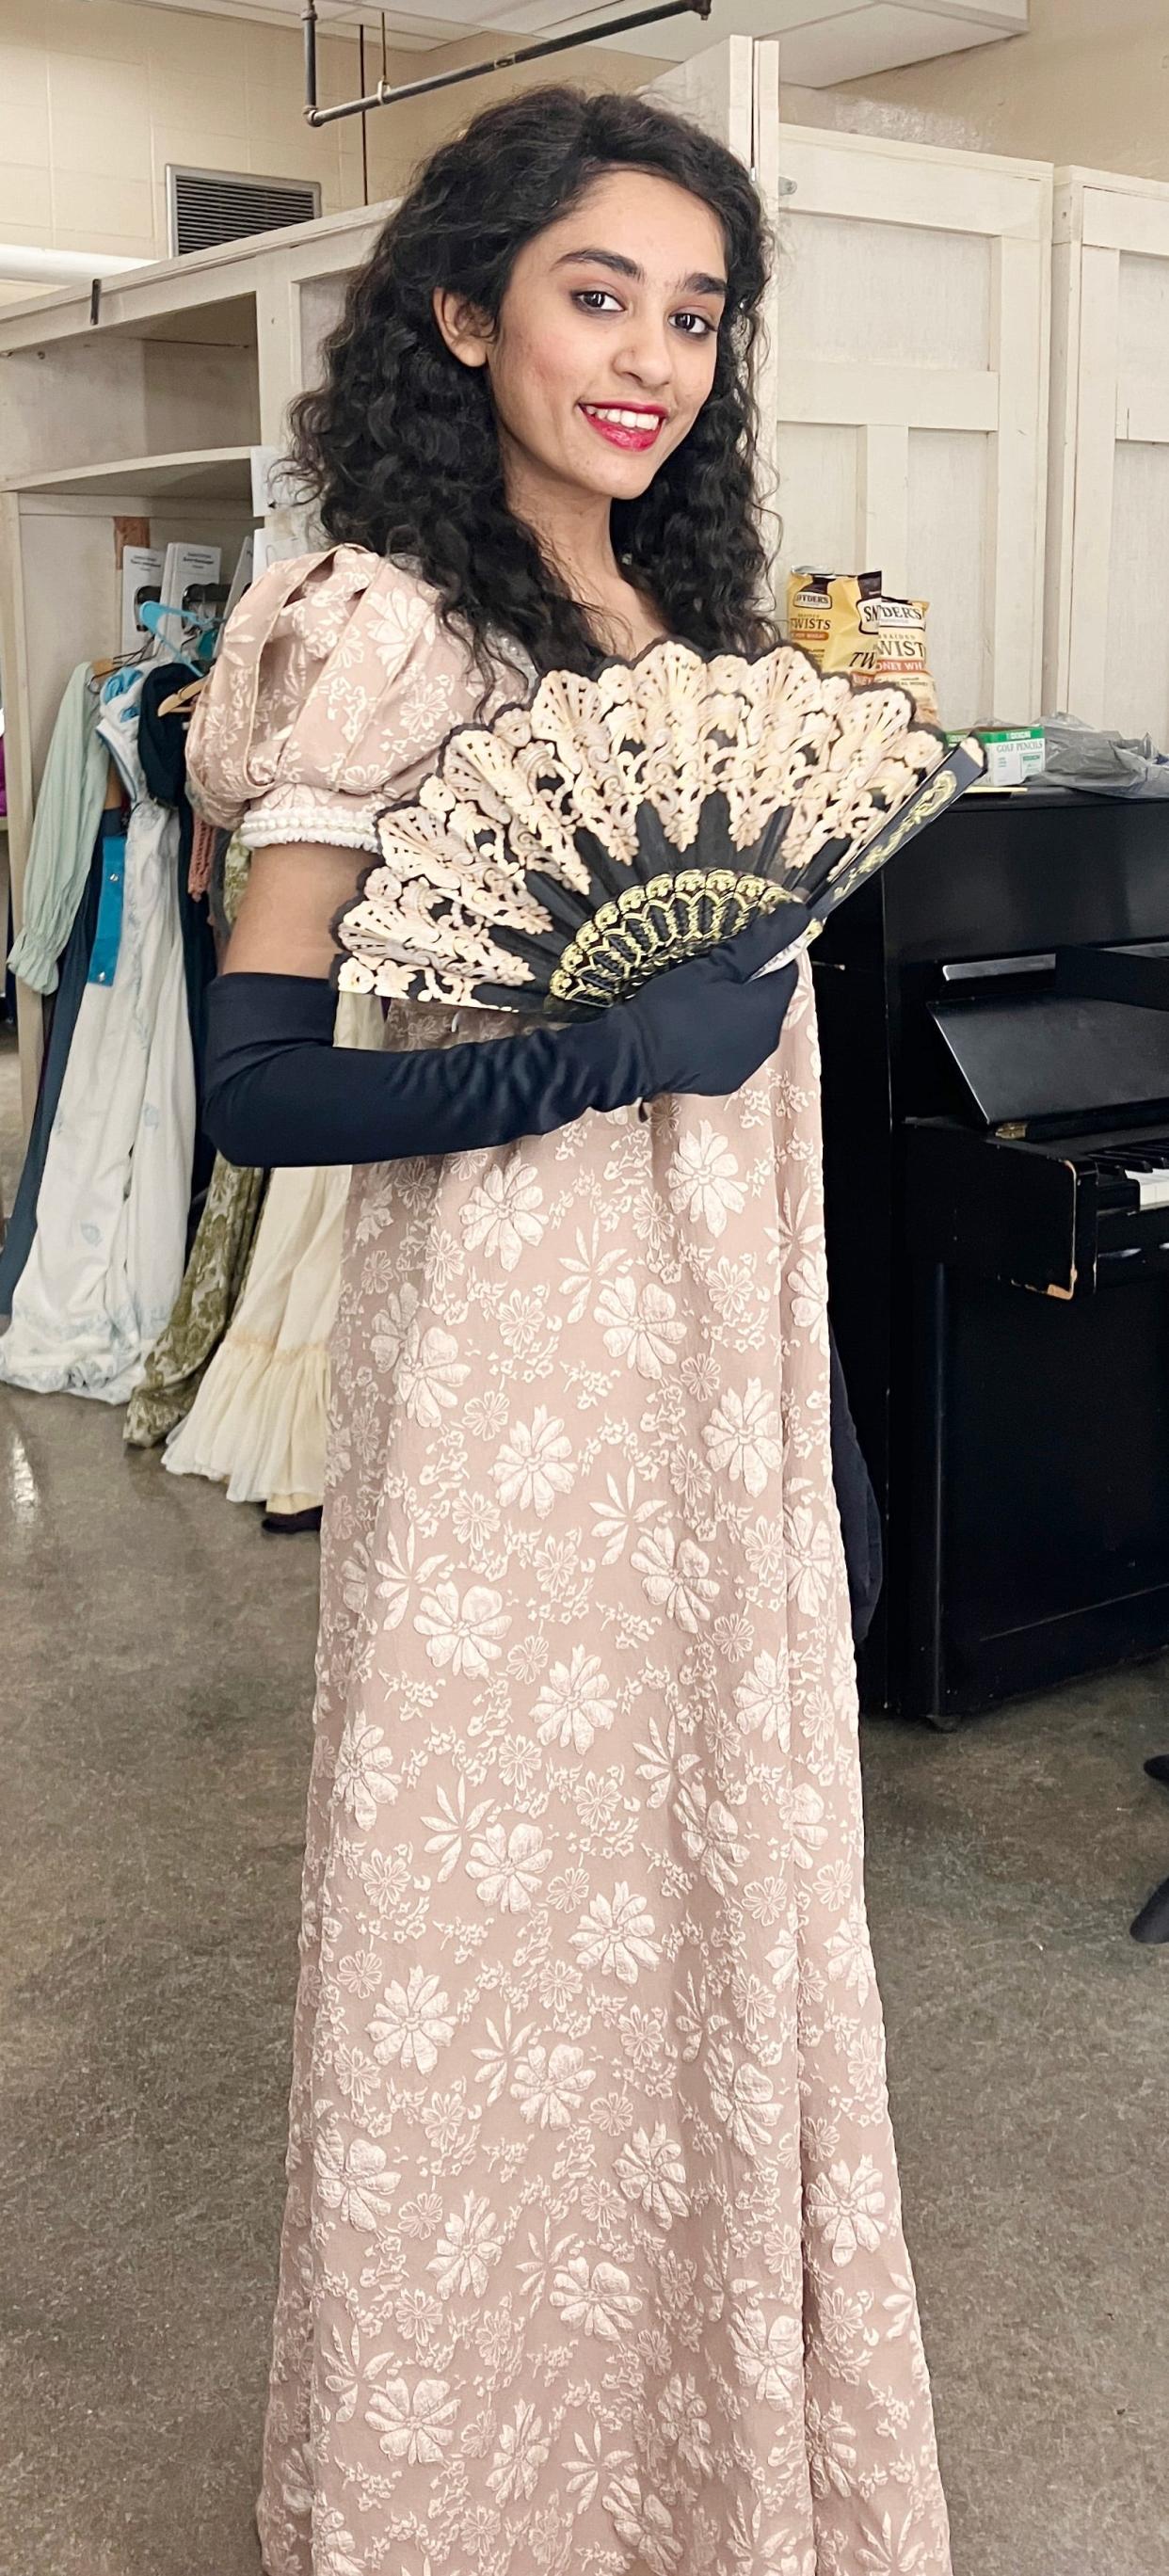 Tiara Abraham poses in one of the outfits for the Indiana University Jacobs School of Music performance of the opera Eugene Onegin.